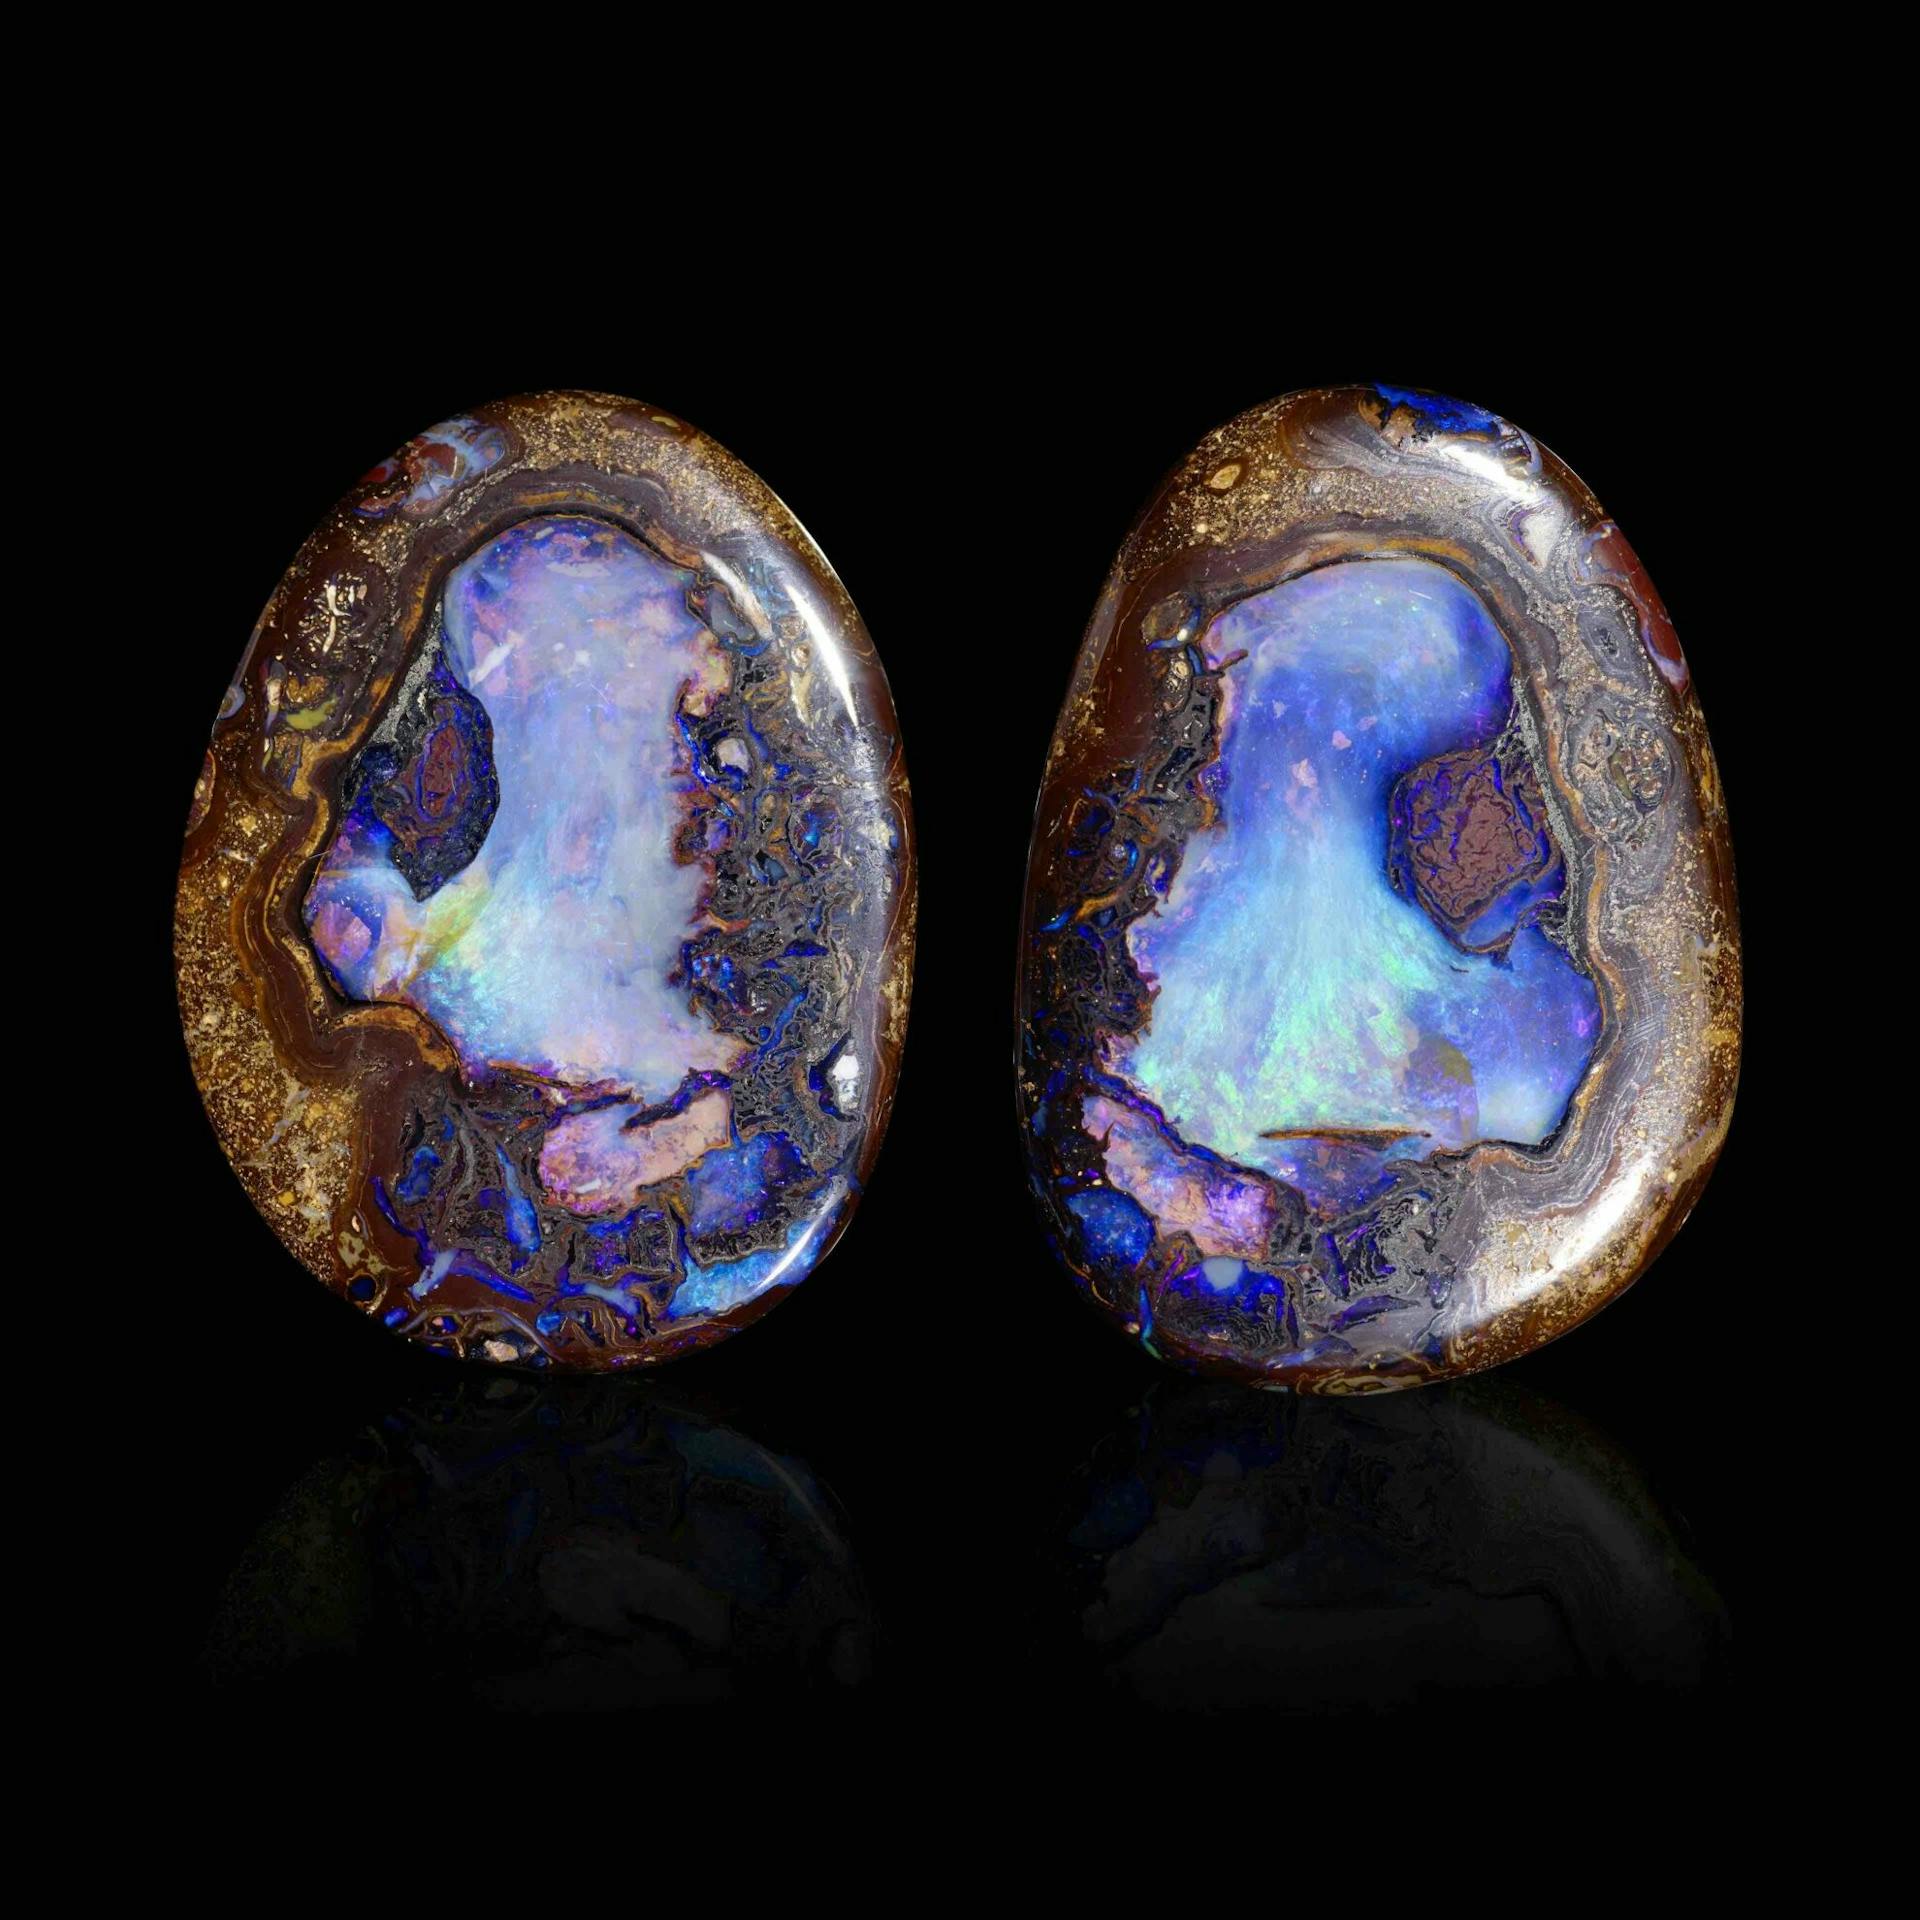 Opals in the Australian Outback